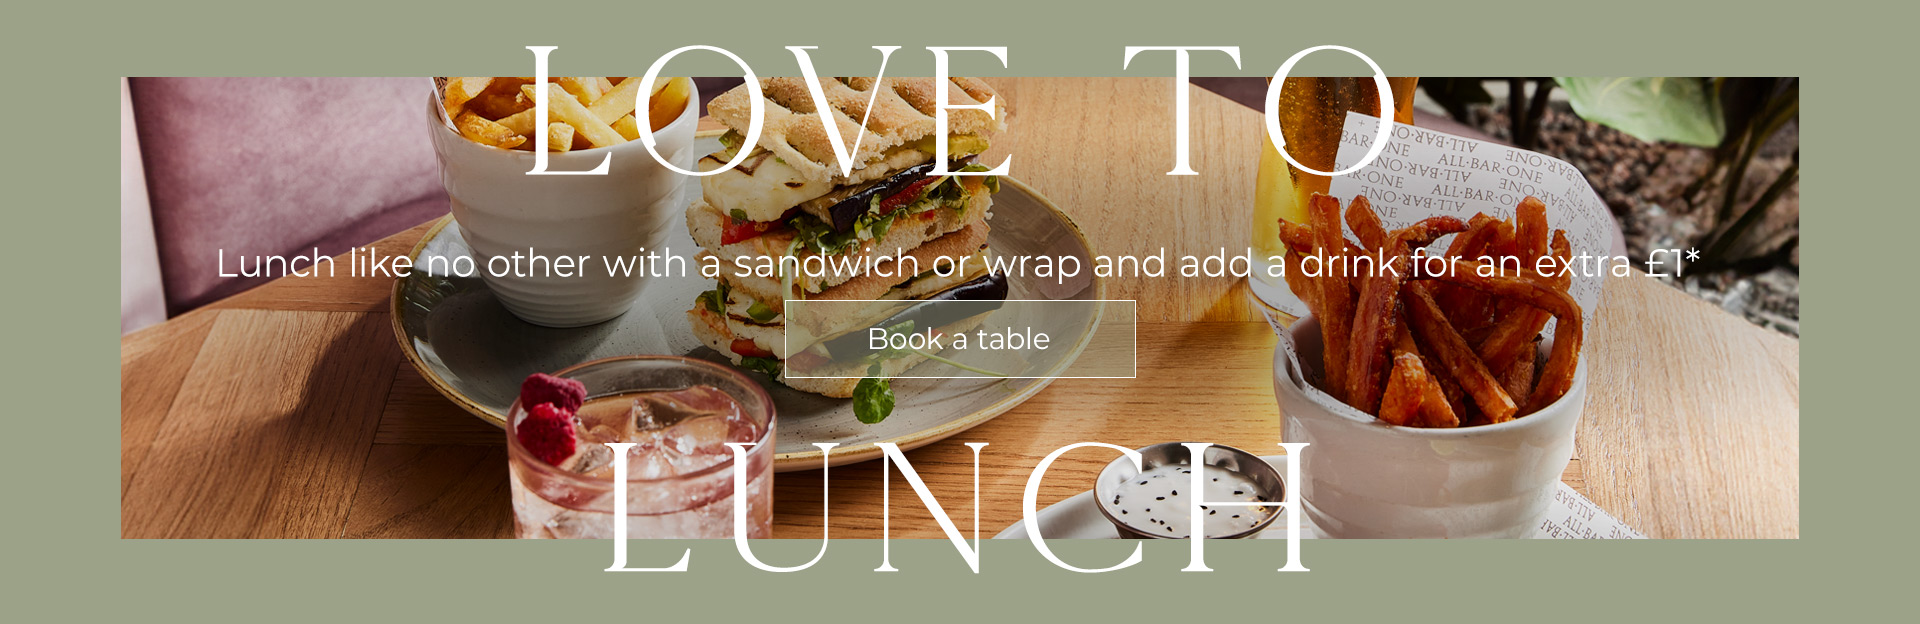 Lunch Offer at All Bar One Windsor